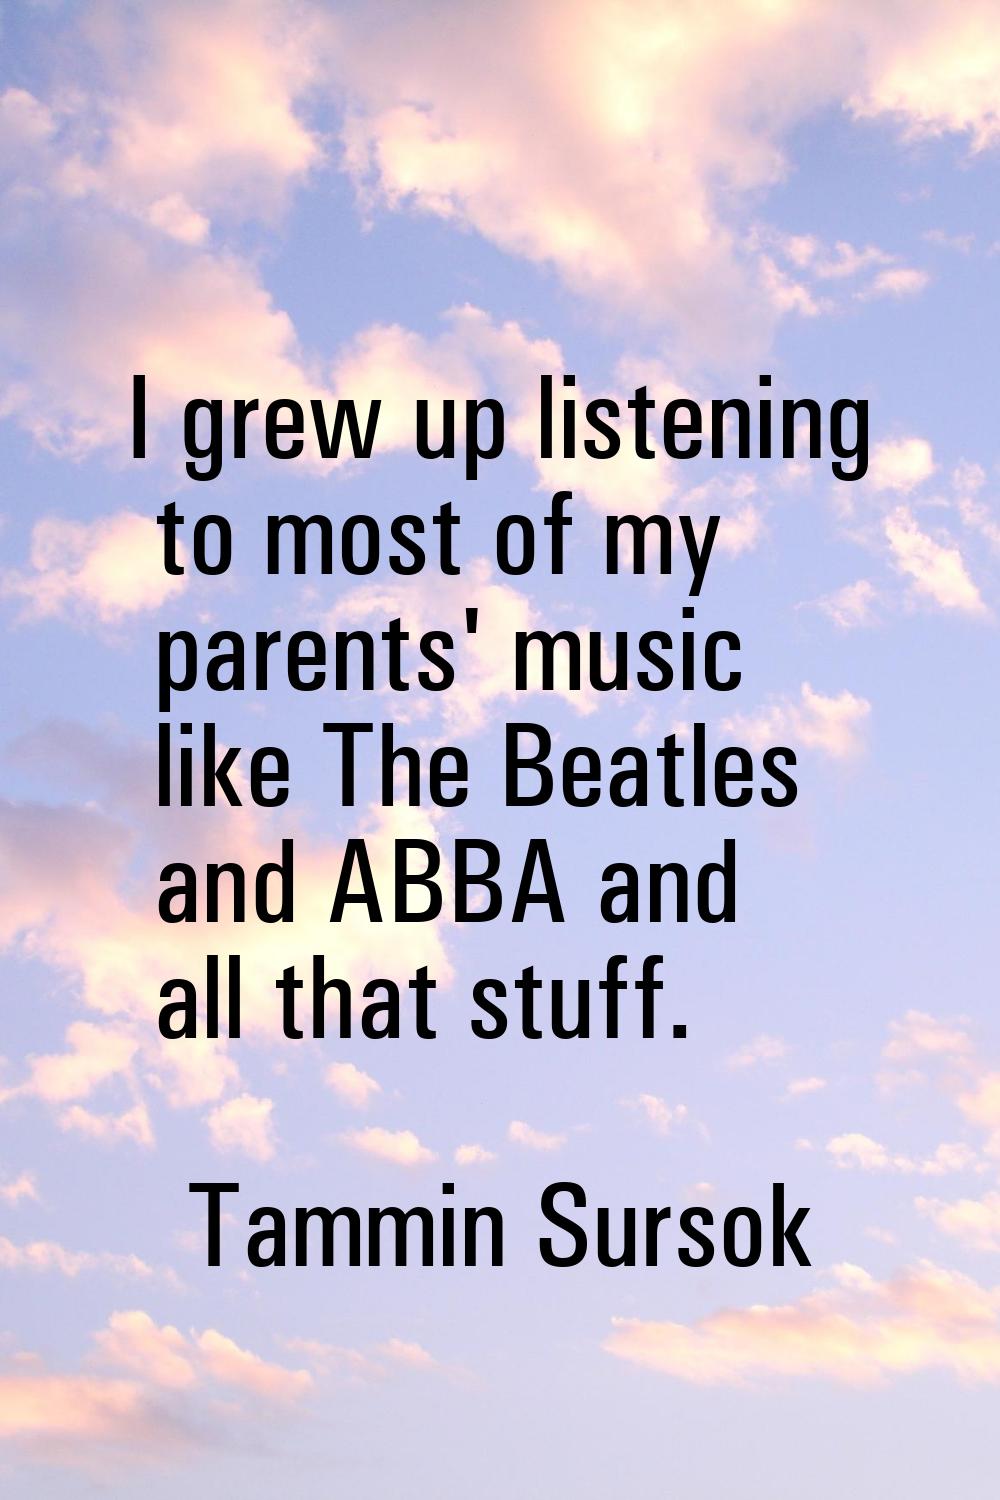 I grew up listening to most of my parents' music like The Beatles and ABBA and all that stuff.